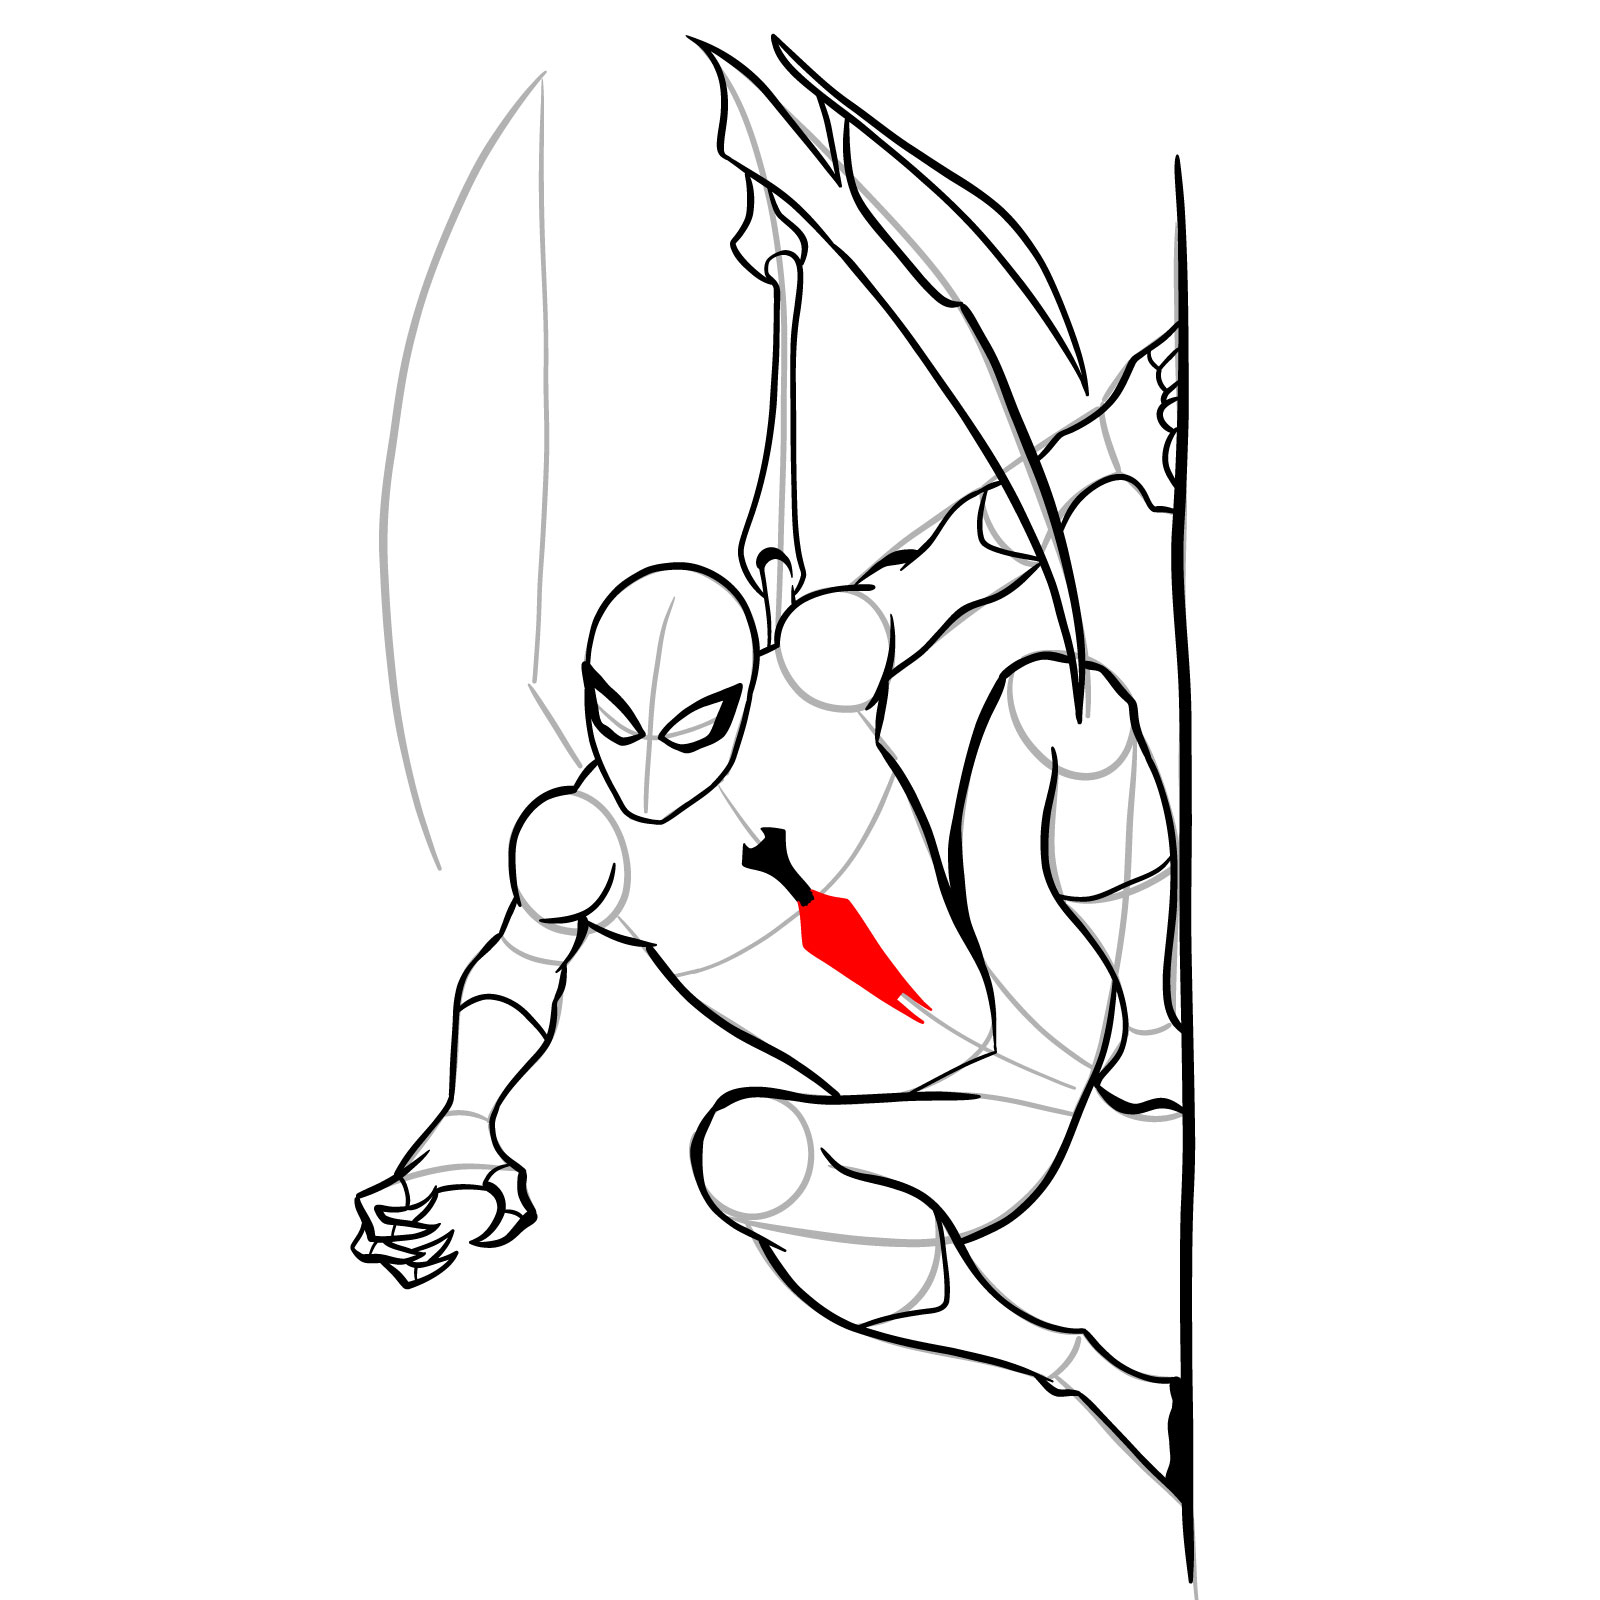 How to draw The Superior Spider-Man - step 29